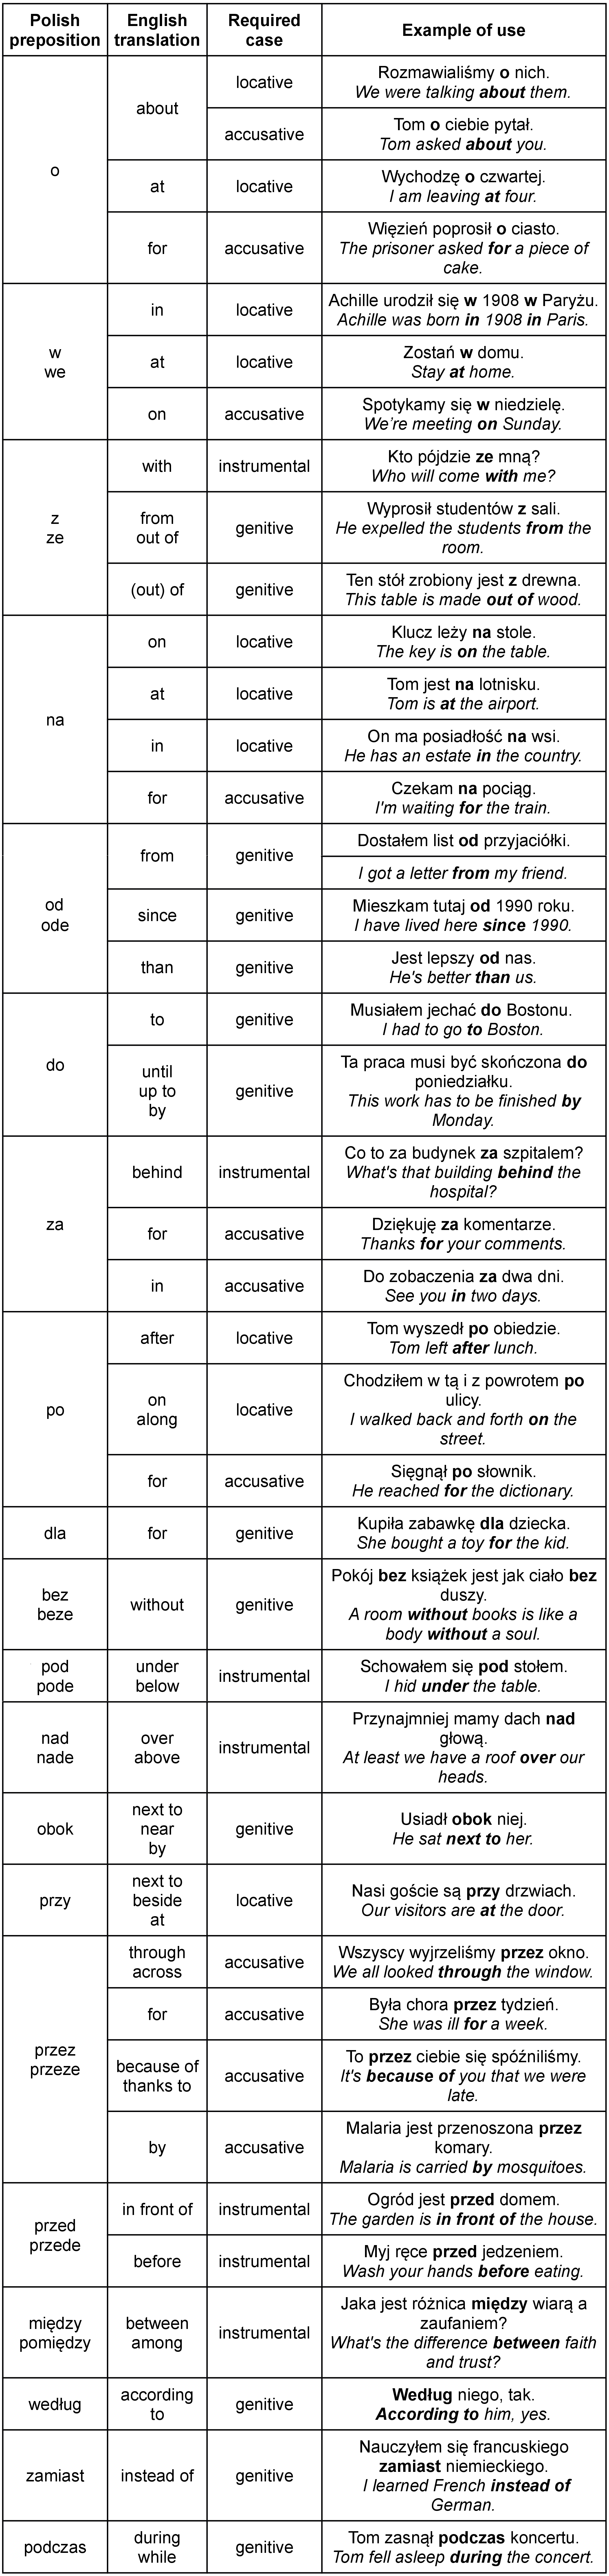 Table with 20 most used Polish prepositions, English translations, required grammatical case and examples of use